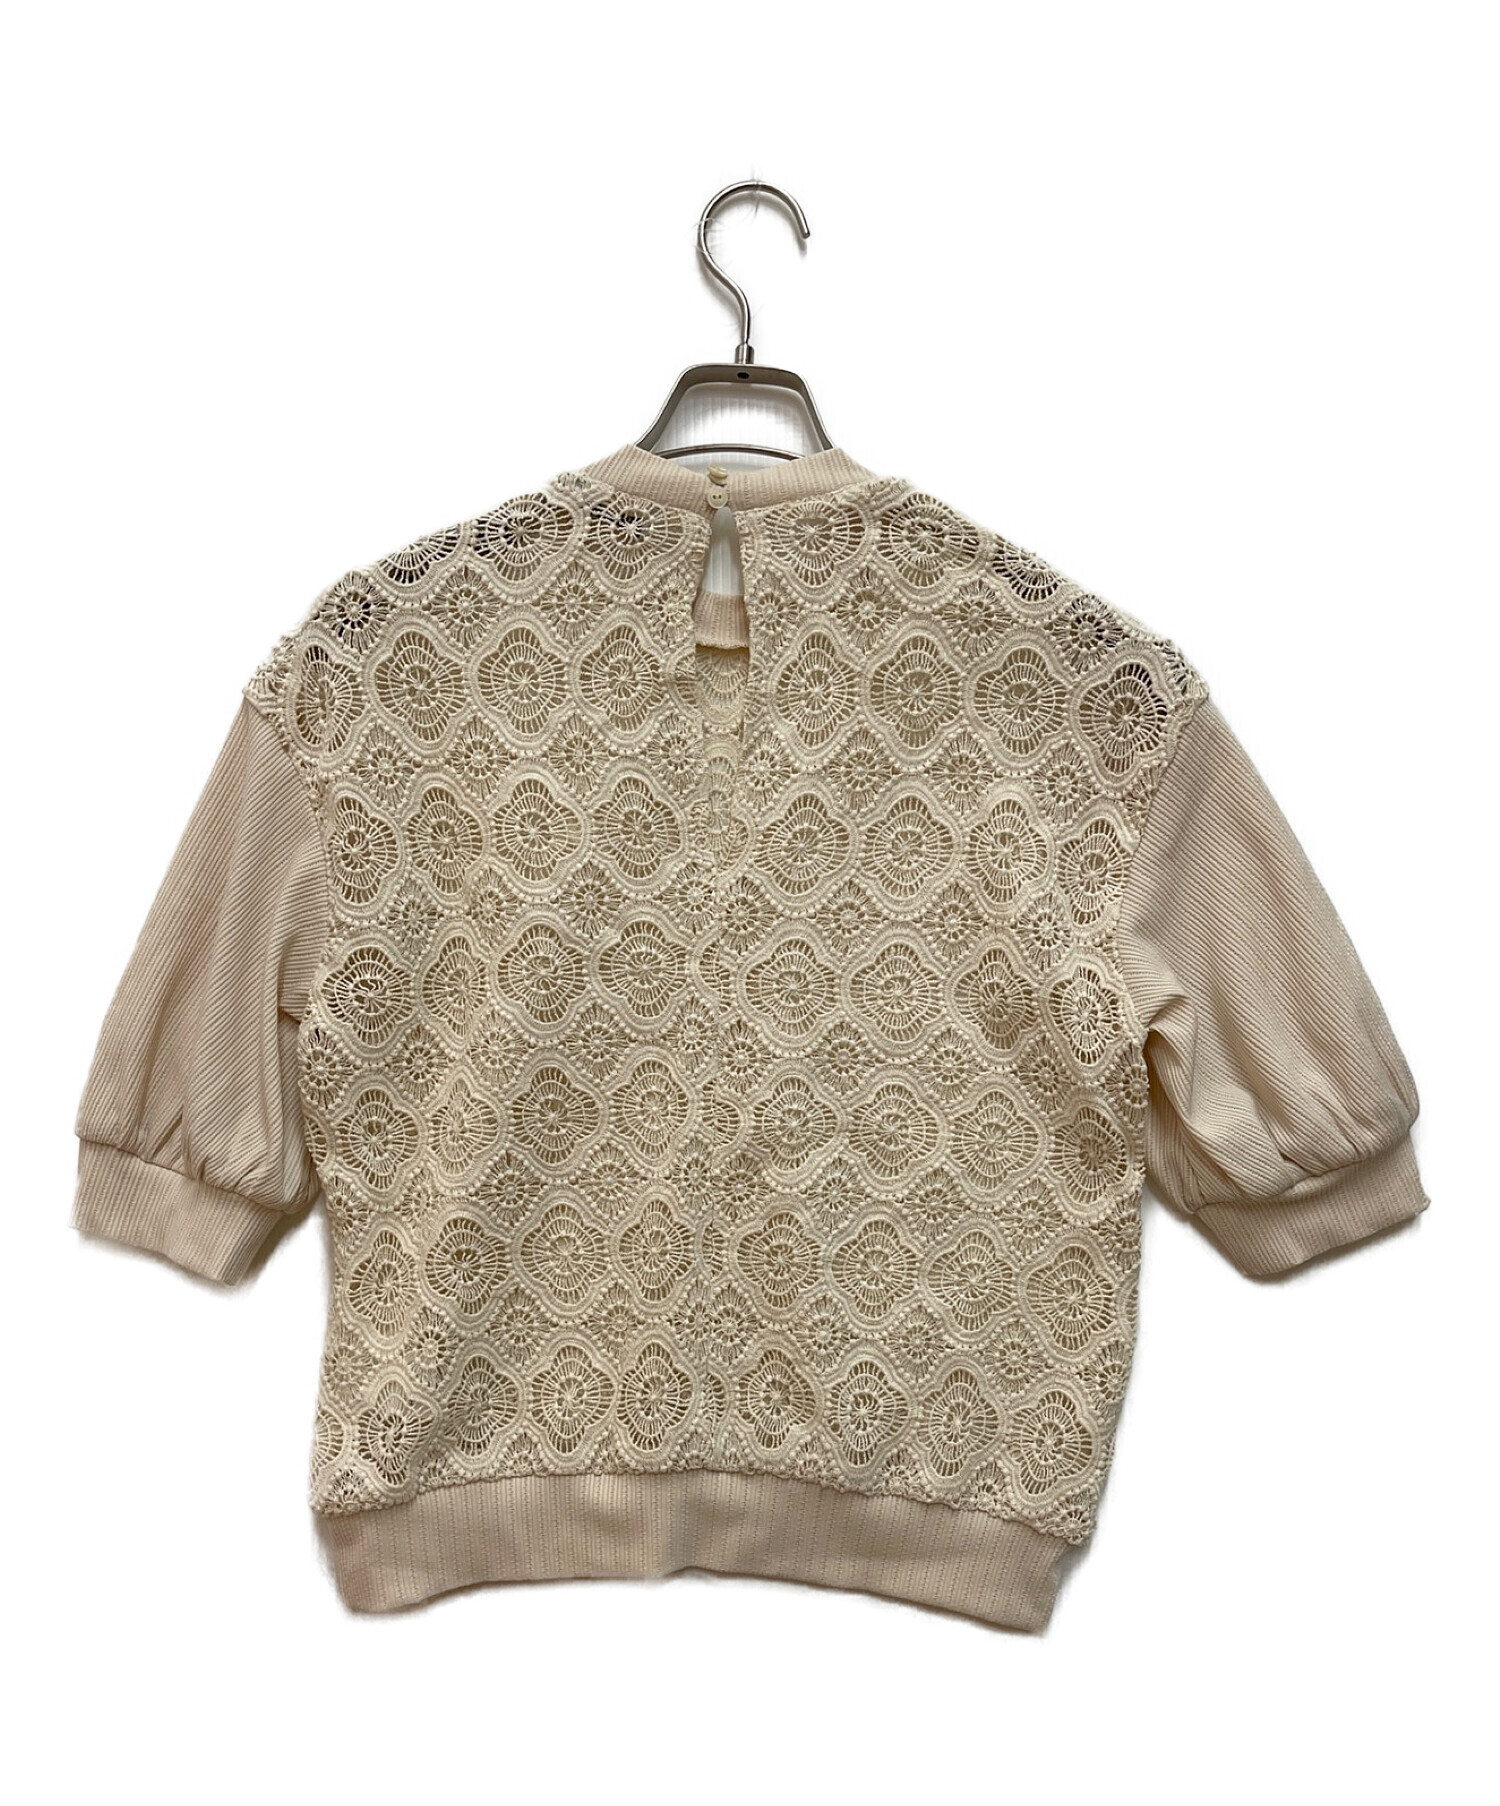 CLANE　クラネ COMPACT VINTAGE LACE TOPS